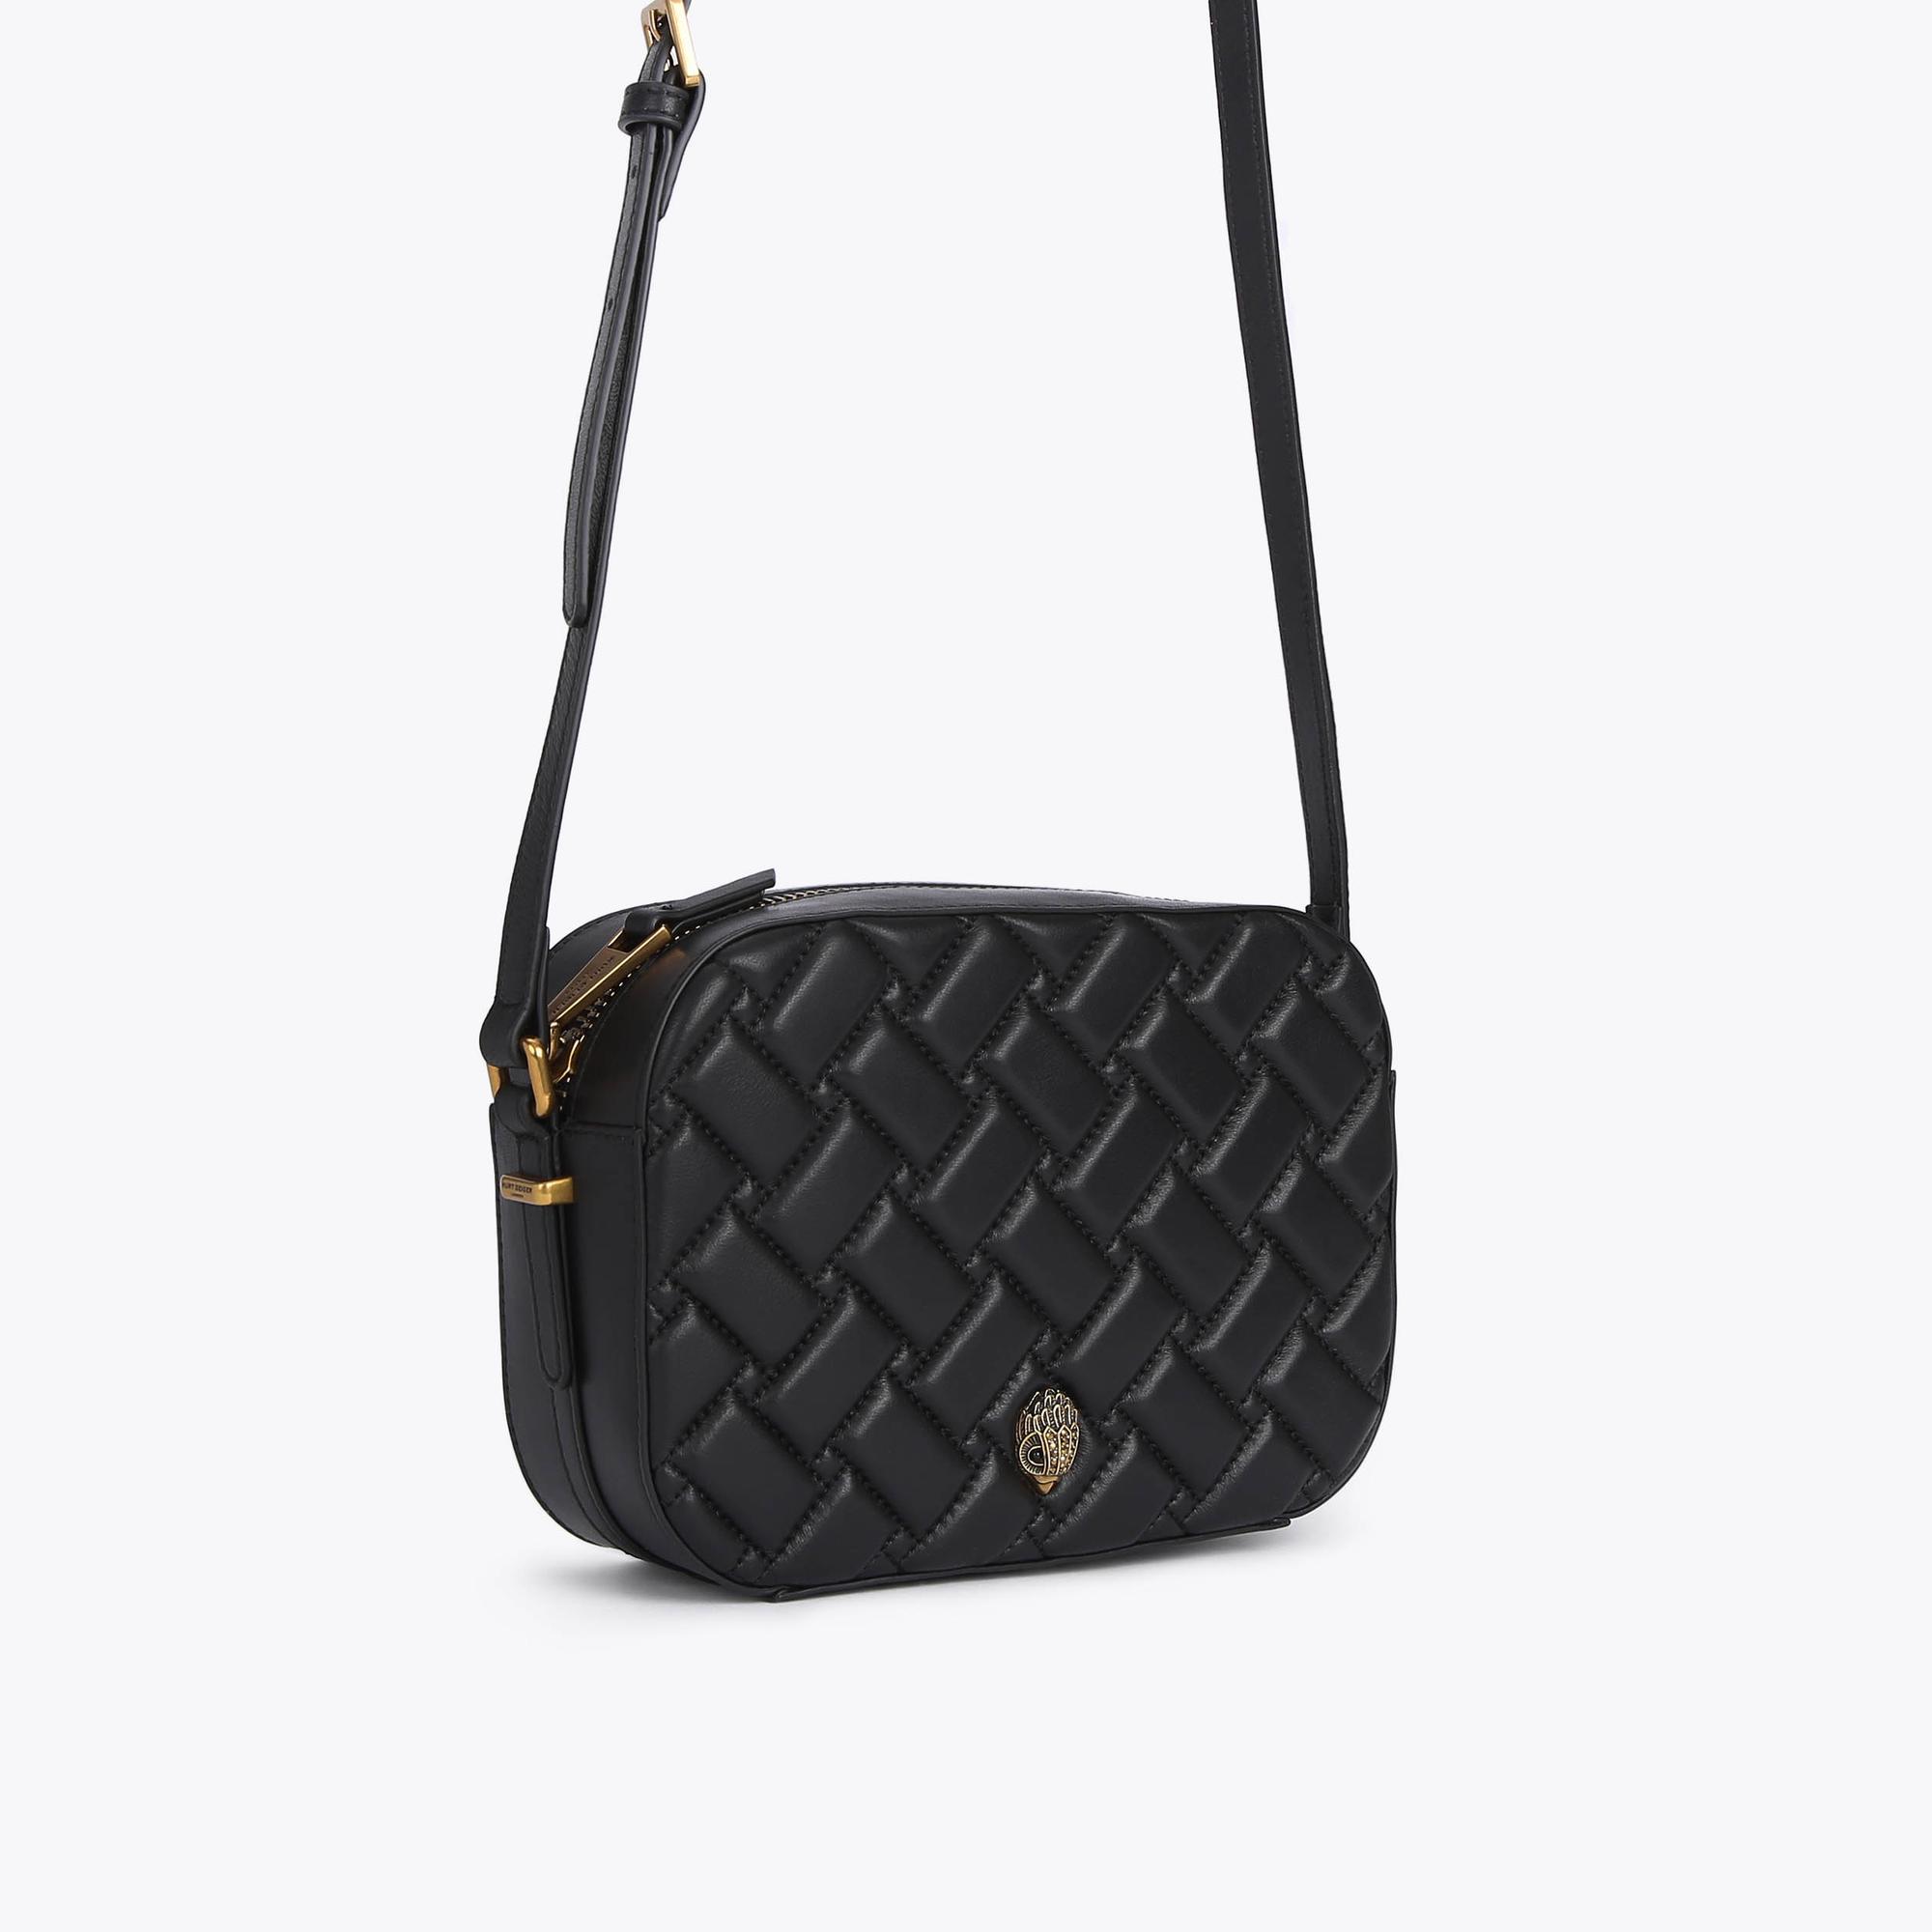 KENSINGTON CROSS BODY Black Leather Quilted Camera Bag by KURT